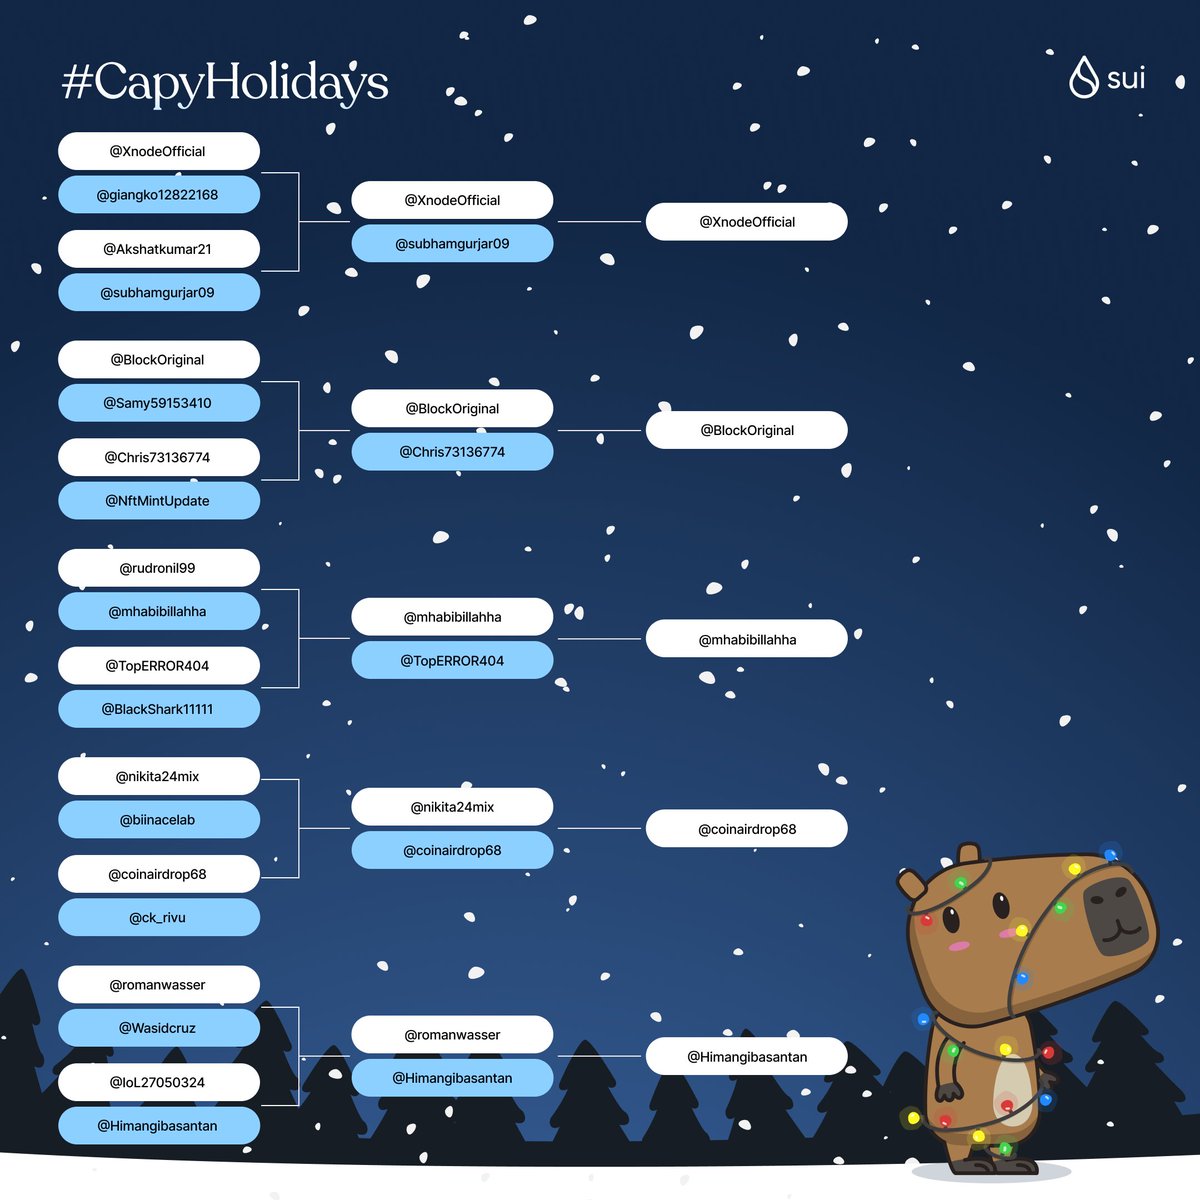 🗣️And the voters have spoken!

🎉Congratulations to the winners of the #CapyHolidays bracket! 

And don't forget: the team behind Capys is hard at working judging their favorite #CapyHoliday names + backstories, and we'll announce those winners soon.